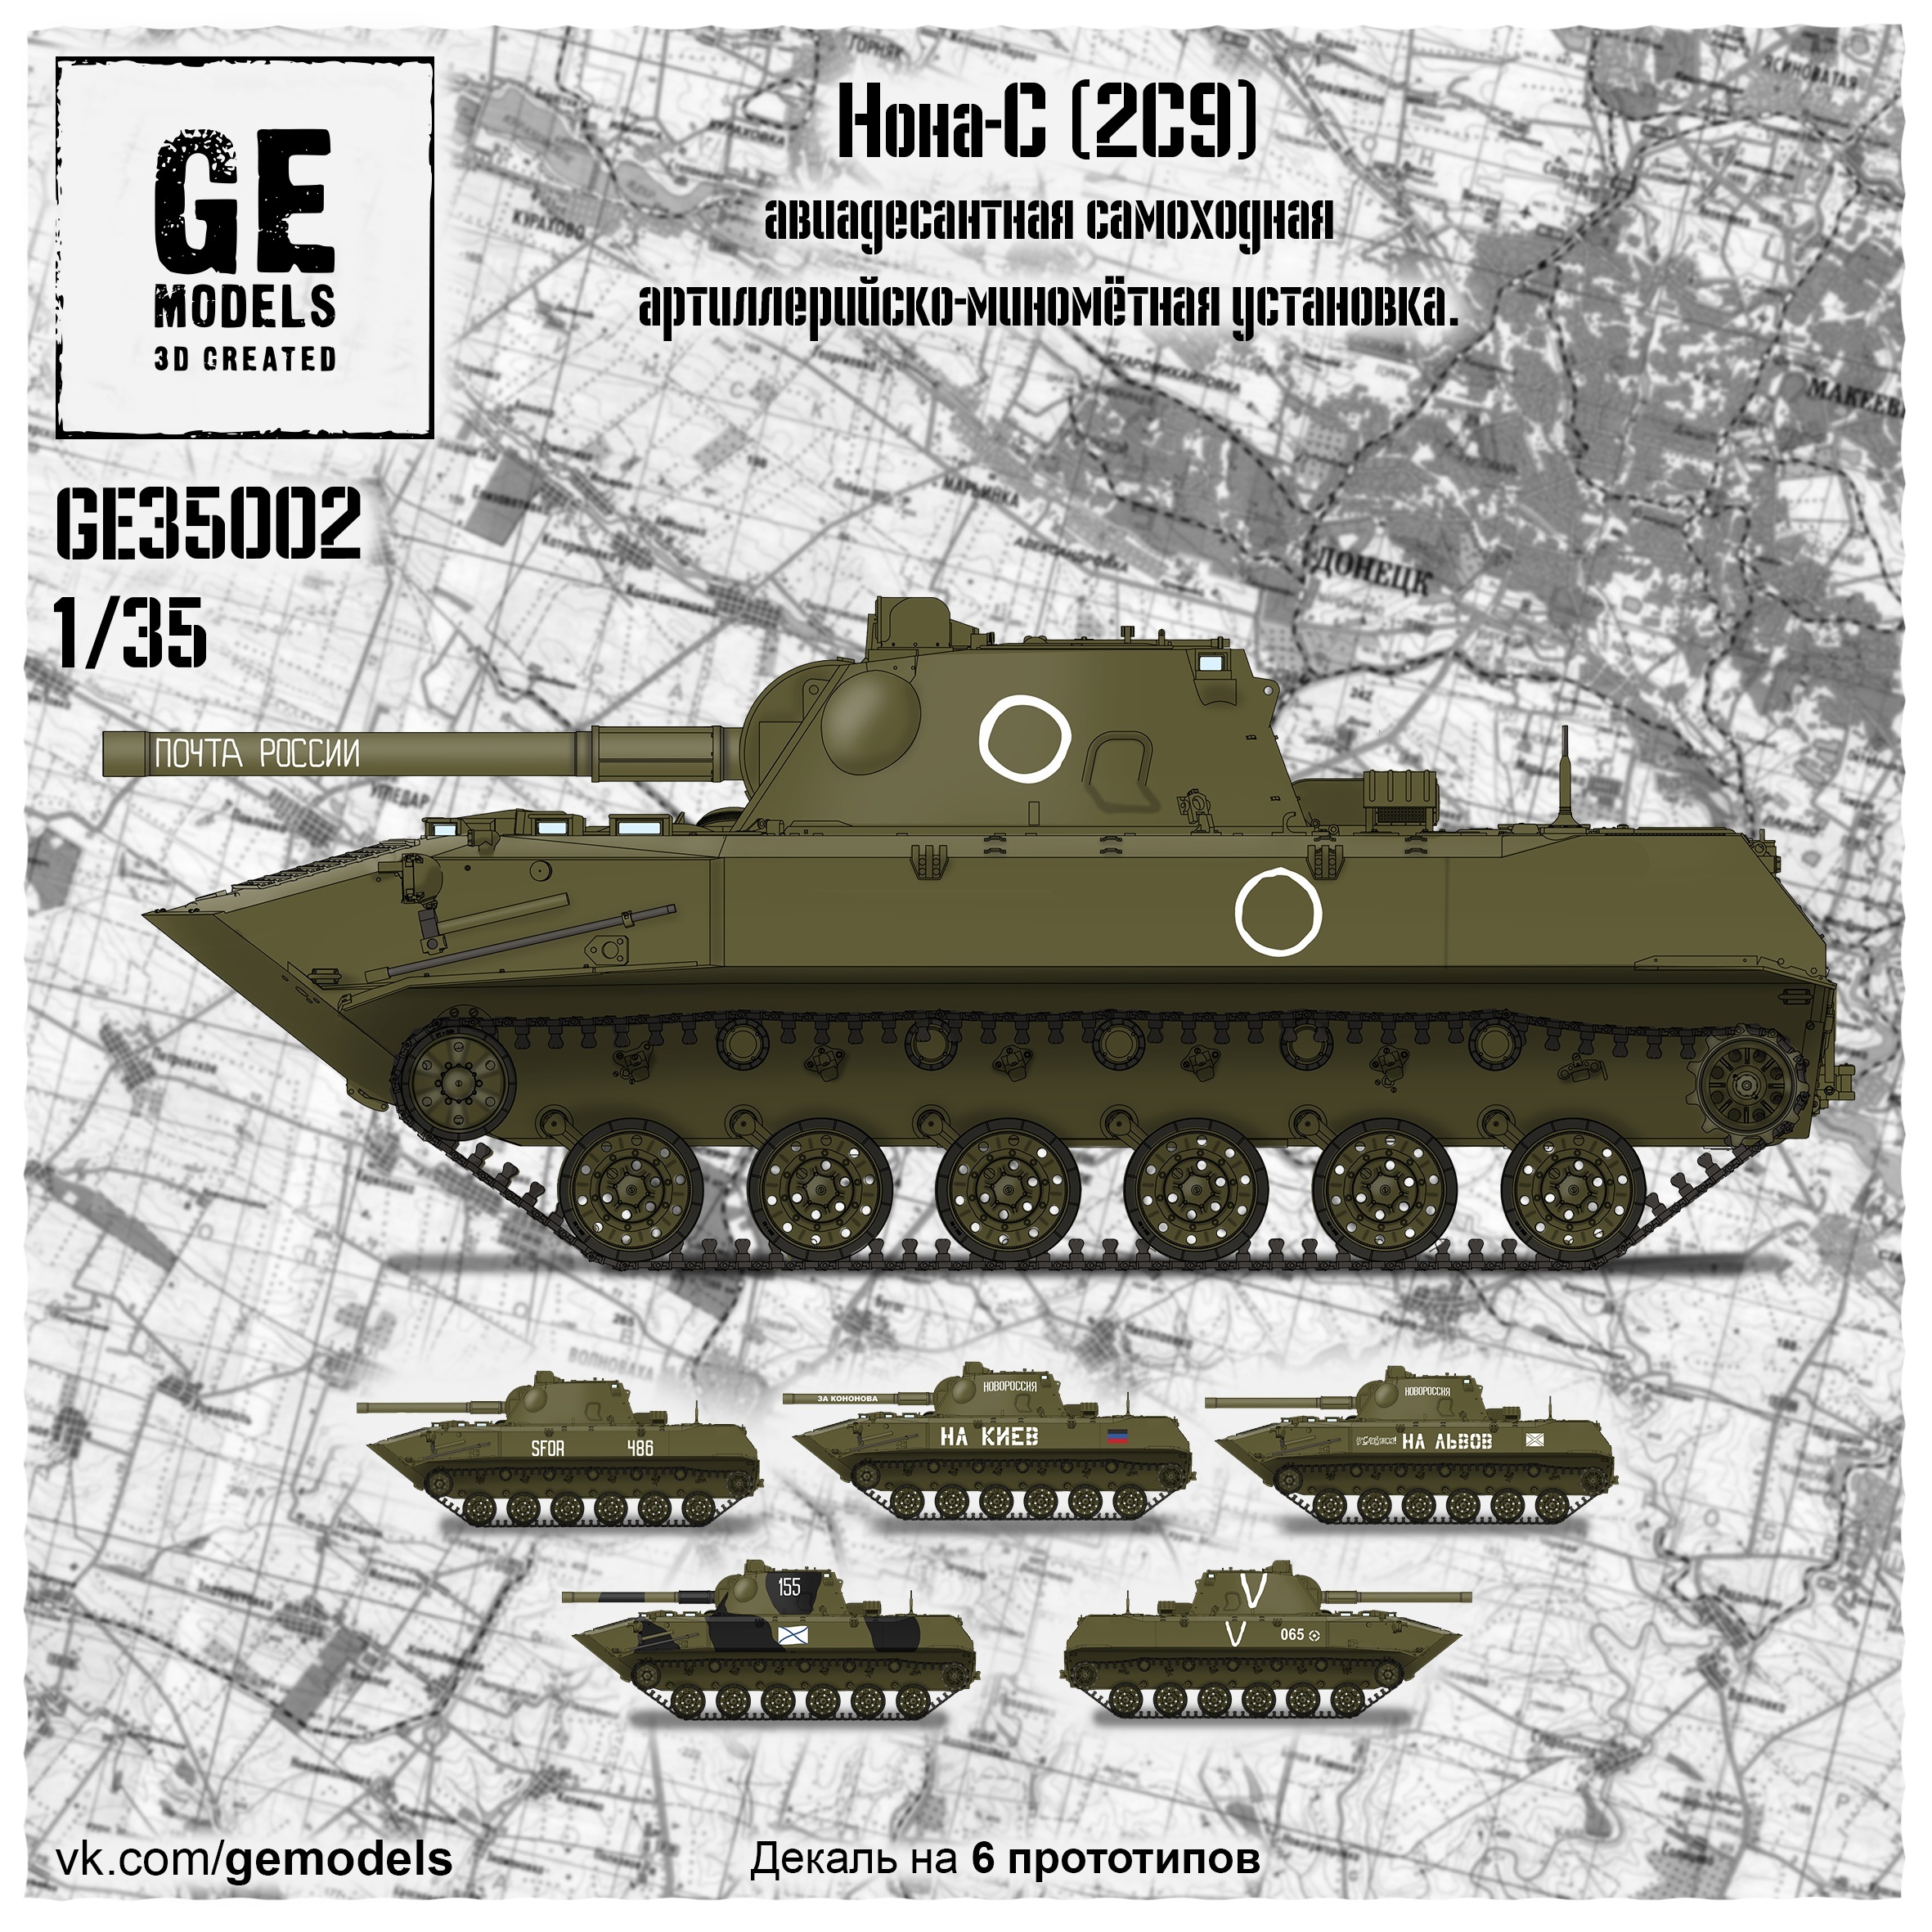 GE35002 GE Models 1/35 Airborne self-propelled artillery and mortar installation 2S9 